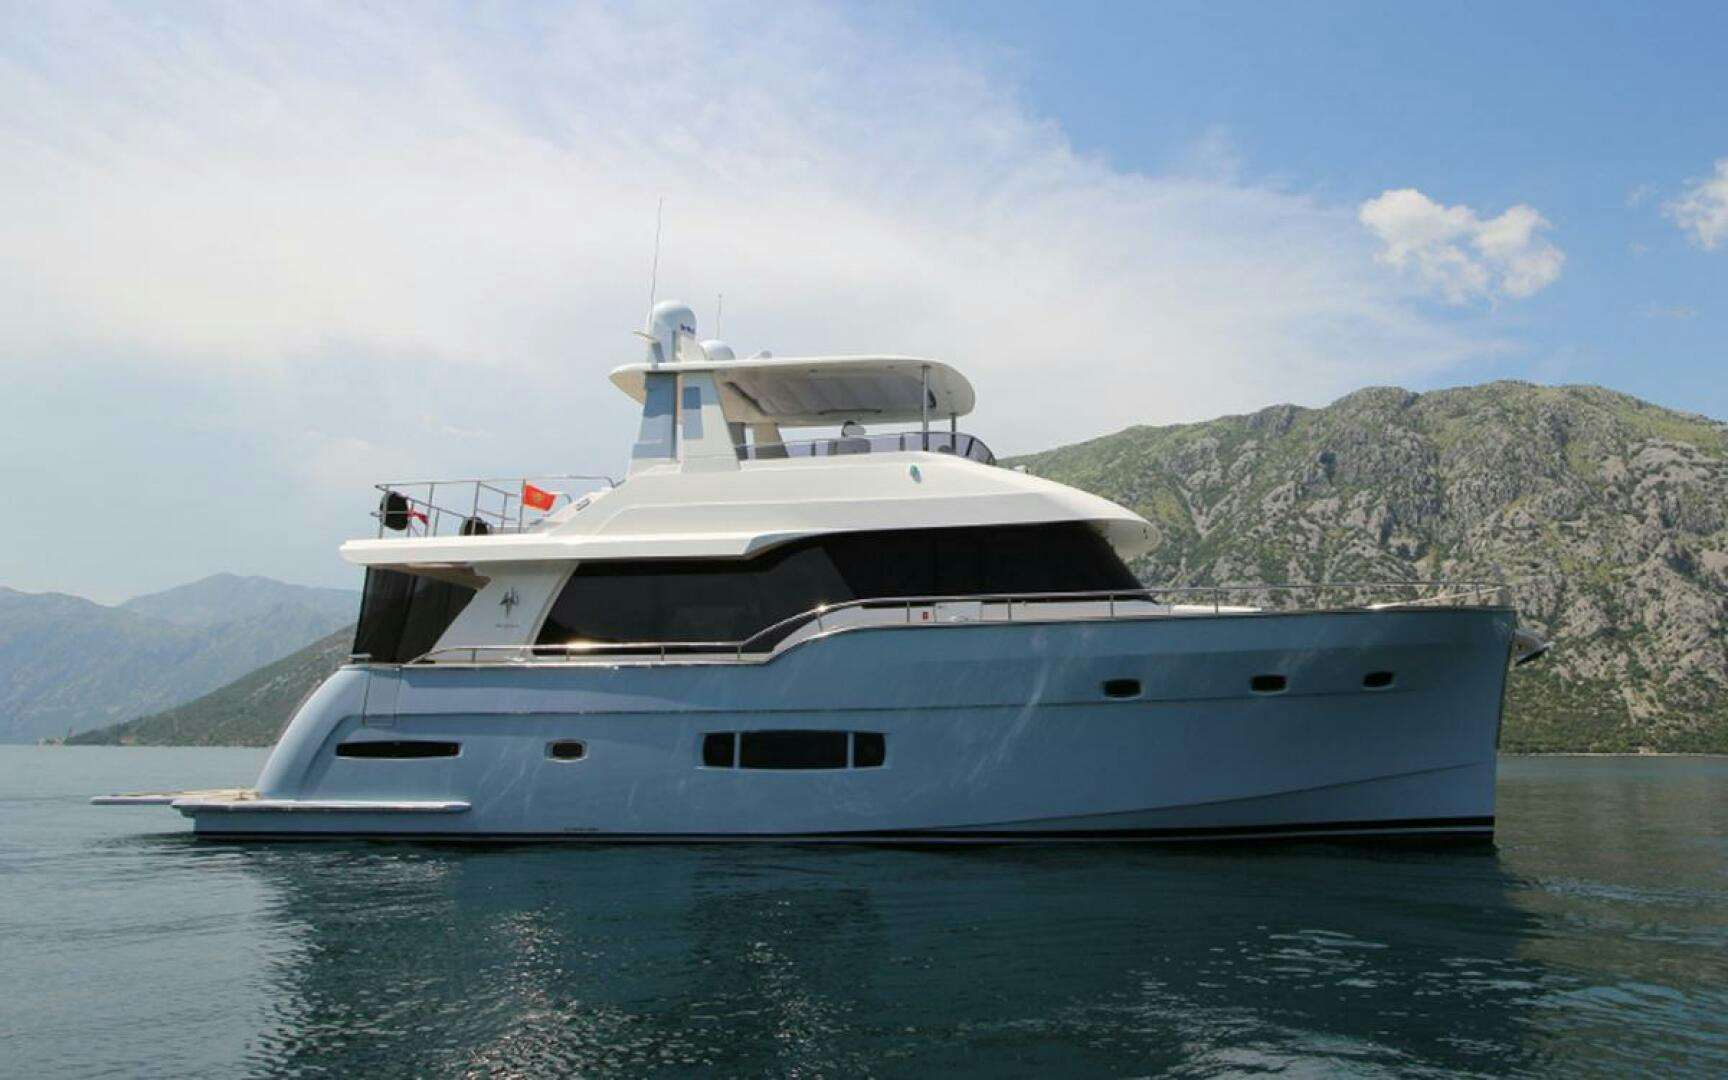 Cire
Yacht for Sale